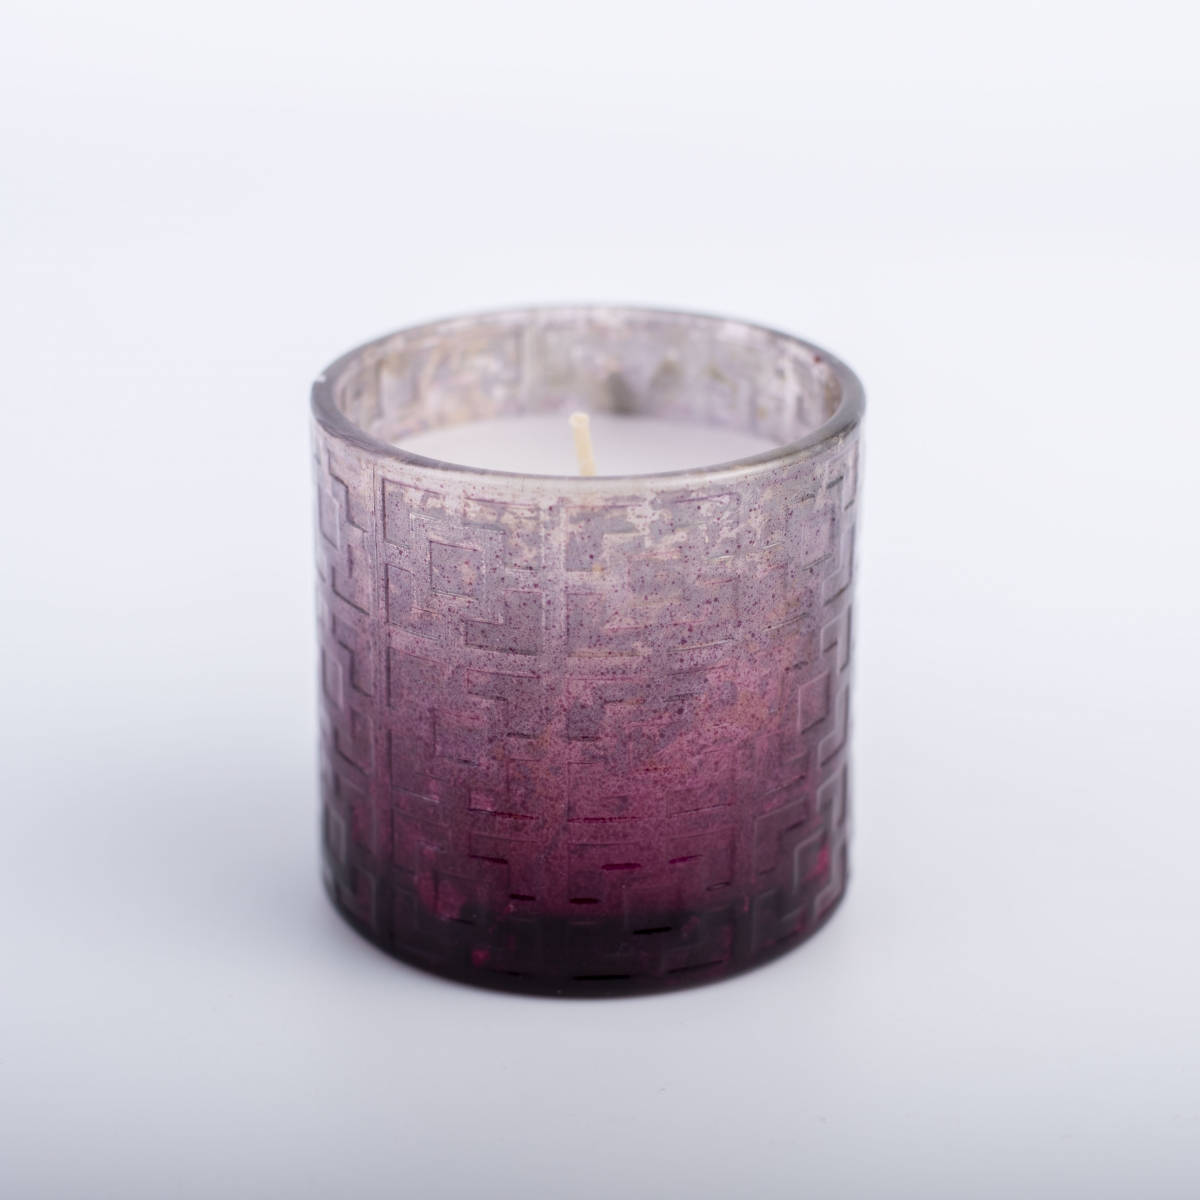 Vegan Candles -Gold Gradient Purple ,Grid Texture ,Essential Oil ,Scented Candles , China Factory ,Price-HOWCANDLE-Candles,Scented Candles,Aromatherapy Candles,Soy Candles,Vegan Candles,Jar Candles,Pillar Candles,Candle Gift Sets,Essential Oils,Reed Diffuser,Candle Holder,